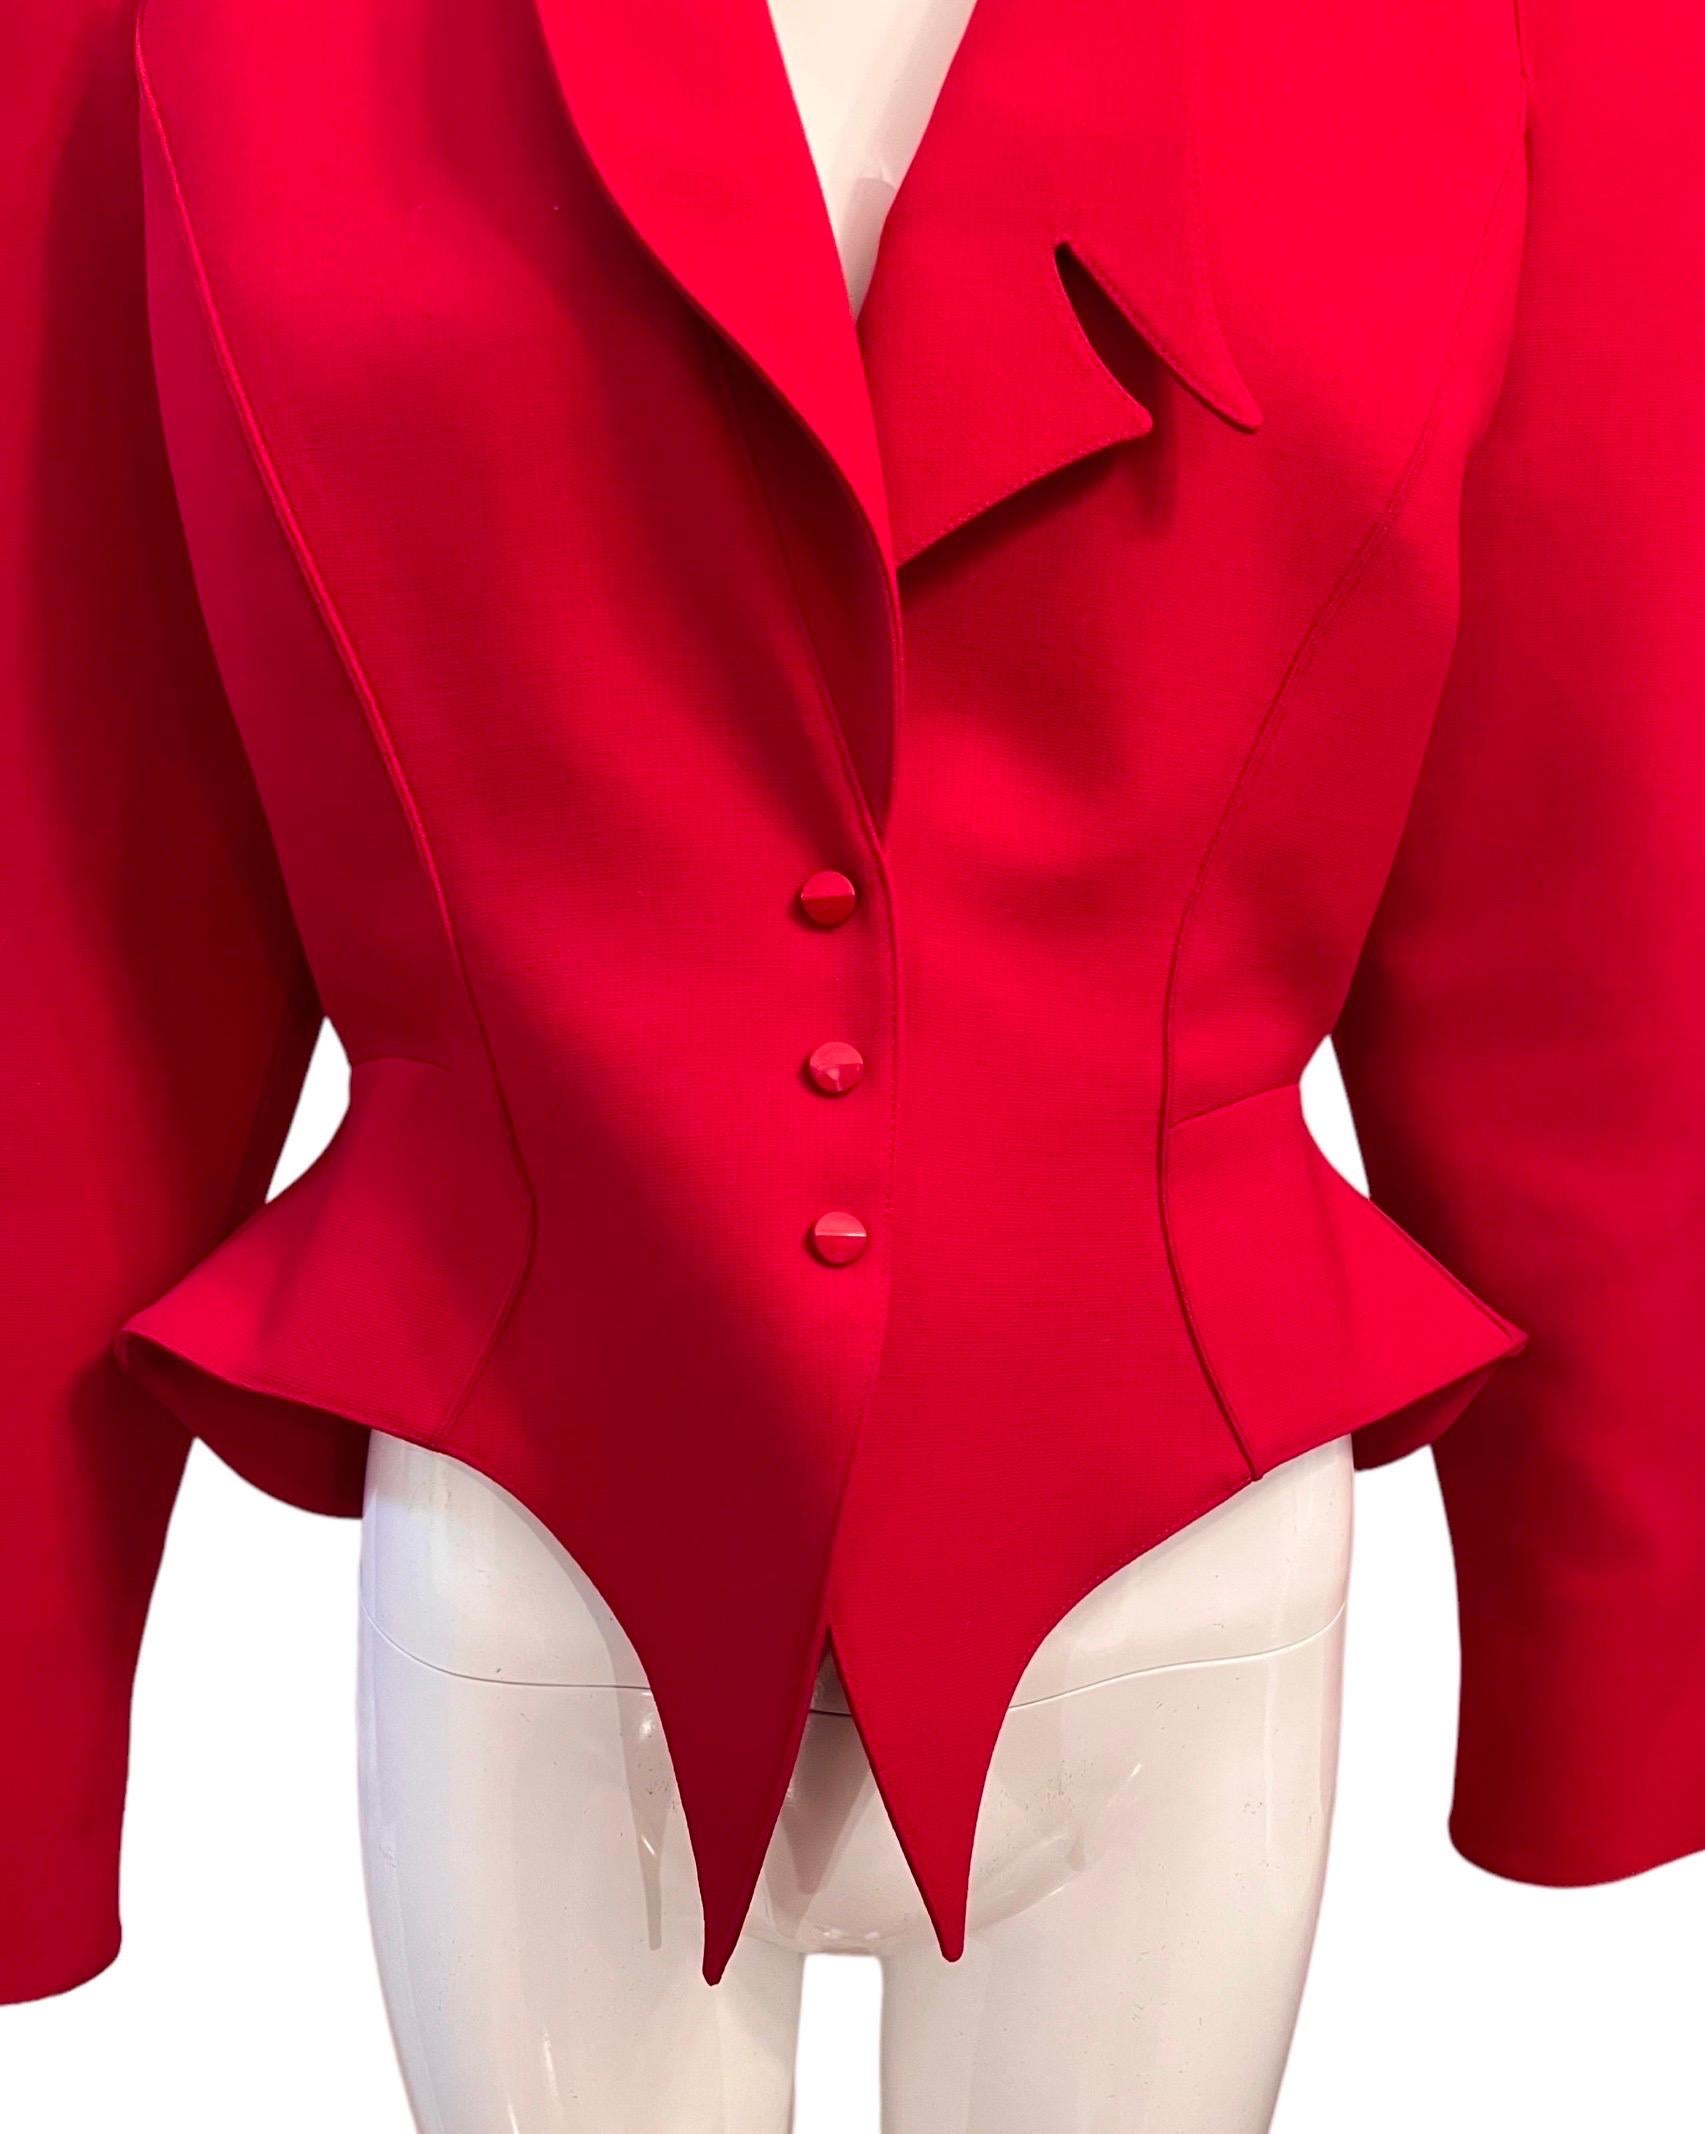 F/W 1988 Thierry Mugler Flaming Red Les Infernales Jagged Sculptural Jacket 7